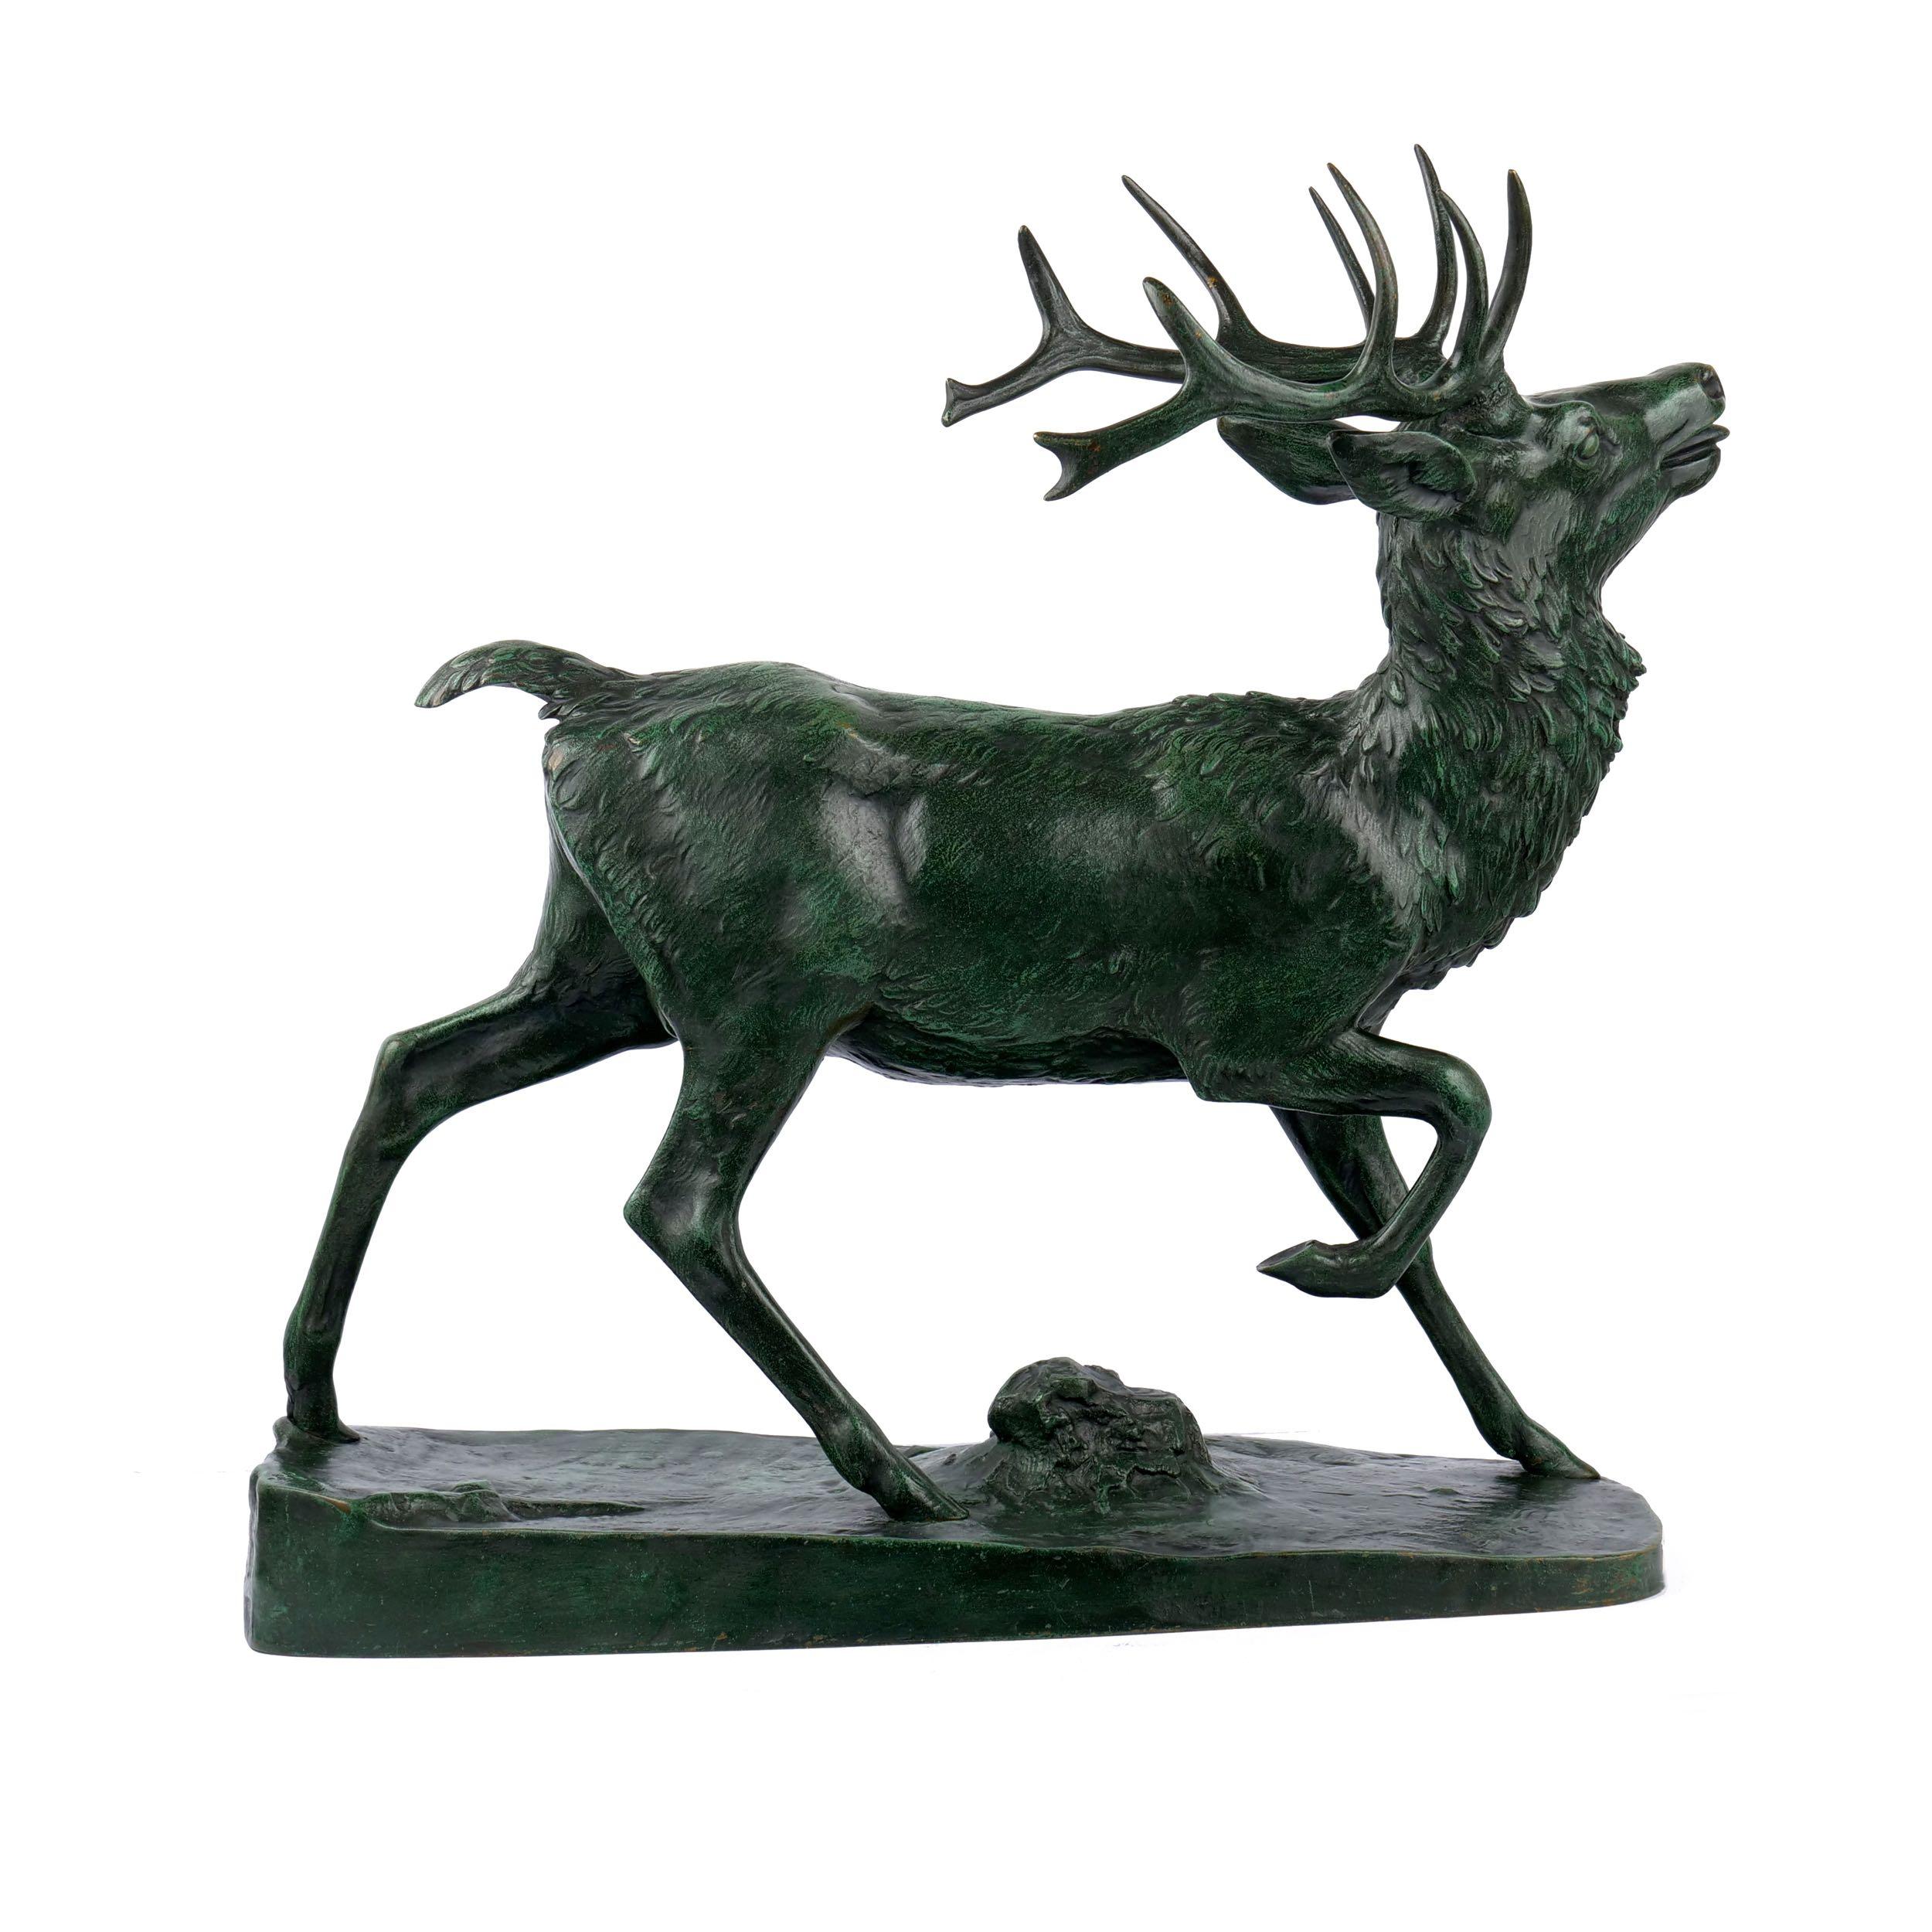 While Antoine-Louis Barye was still relatively unknown and prior to his 1830 initial exhibition at the Paris Salon, in 1829 Susse Freres bought the rights to three of his stag subjects including Cerf Debout. While it was included in their 1844 sales